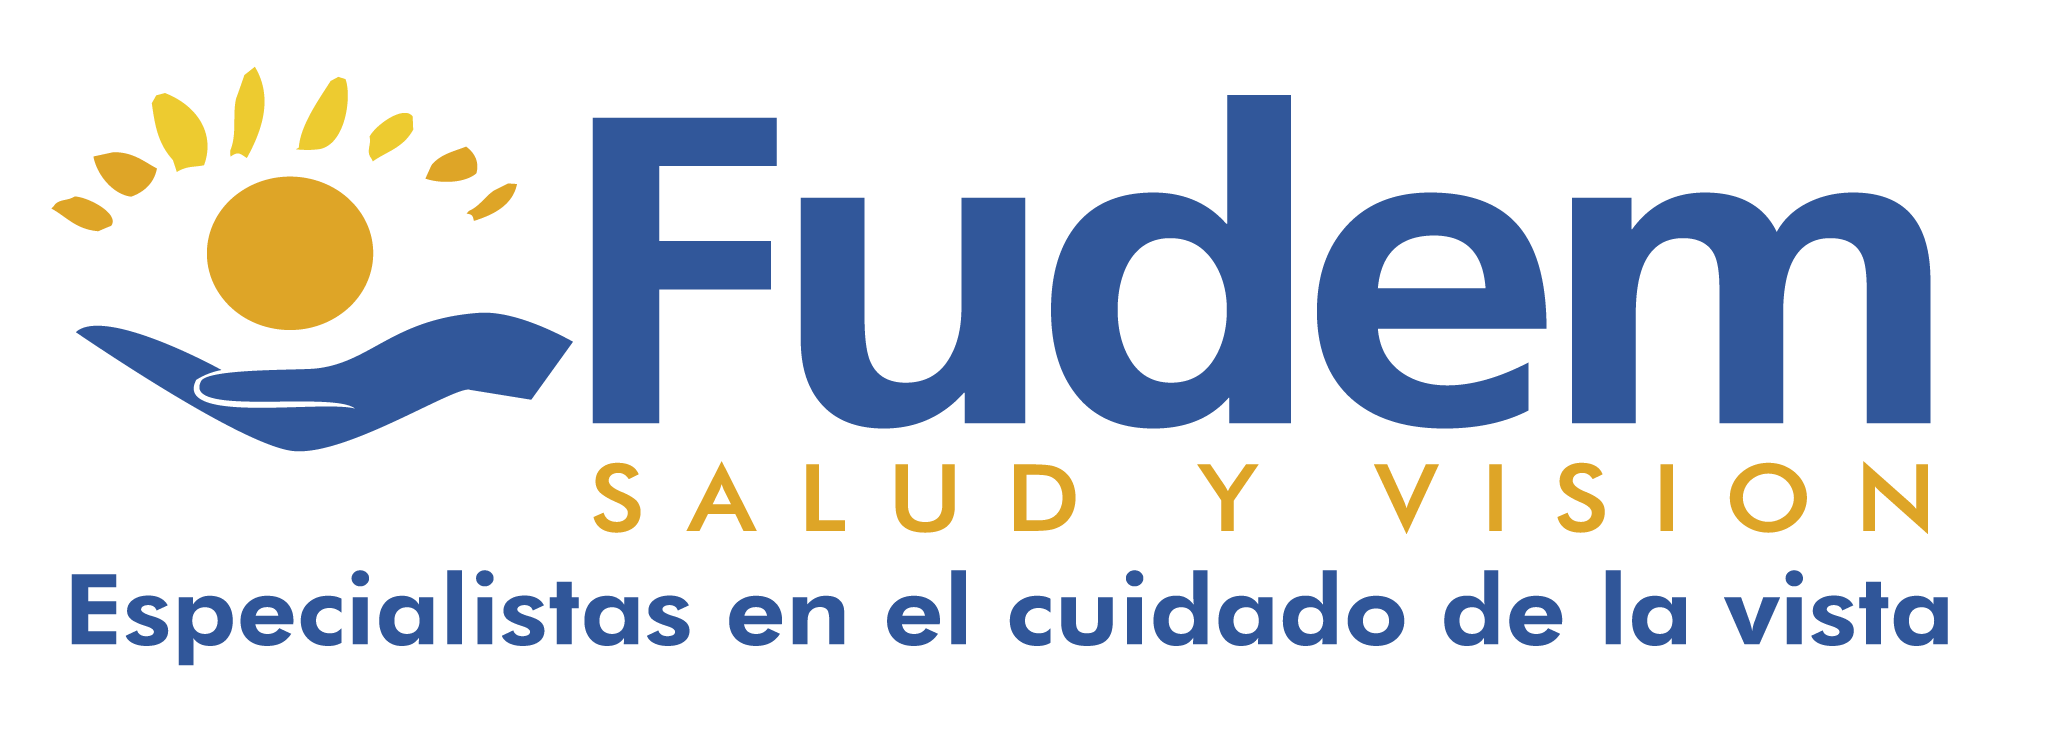 Fudem_ACFTechnologies_english_improving_the_experience_of_patient_and_doctors_through_of_the_management_organization_dating_and_digital_transformation-2021_logo